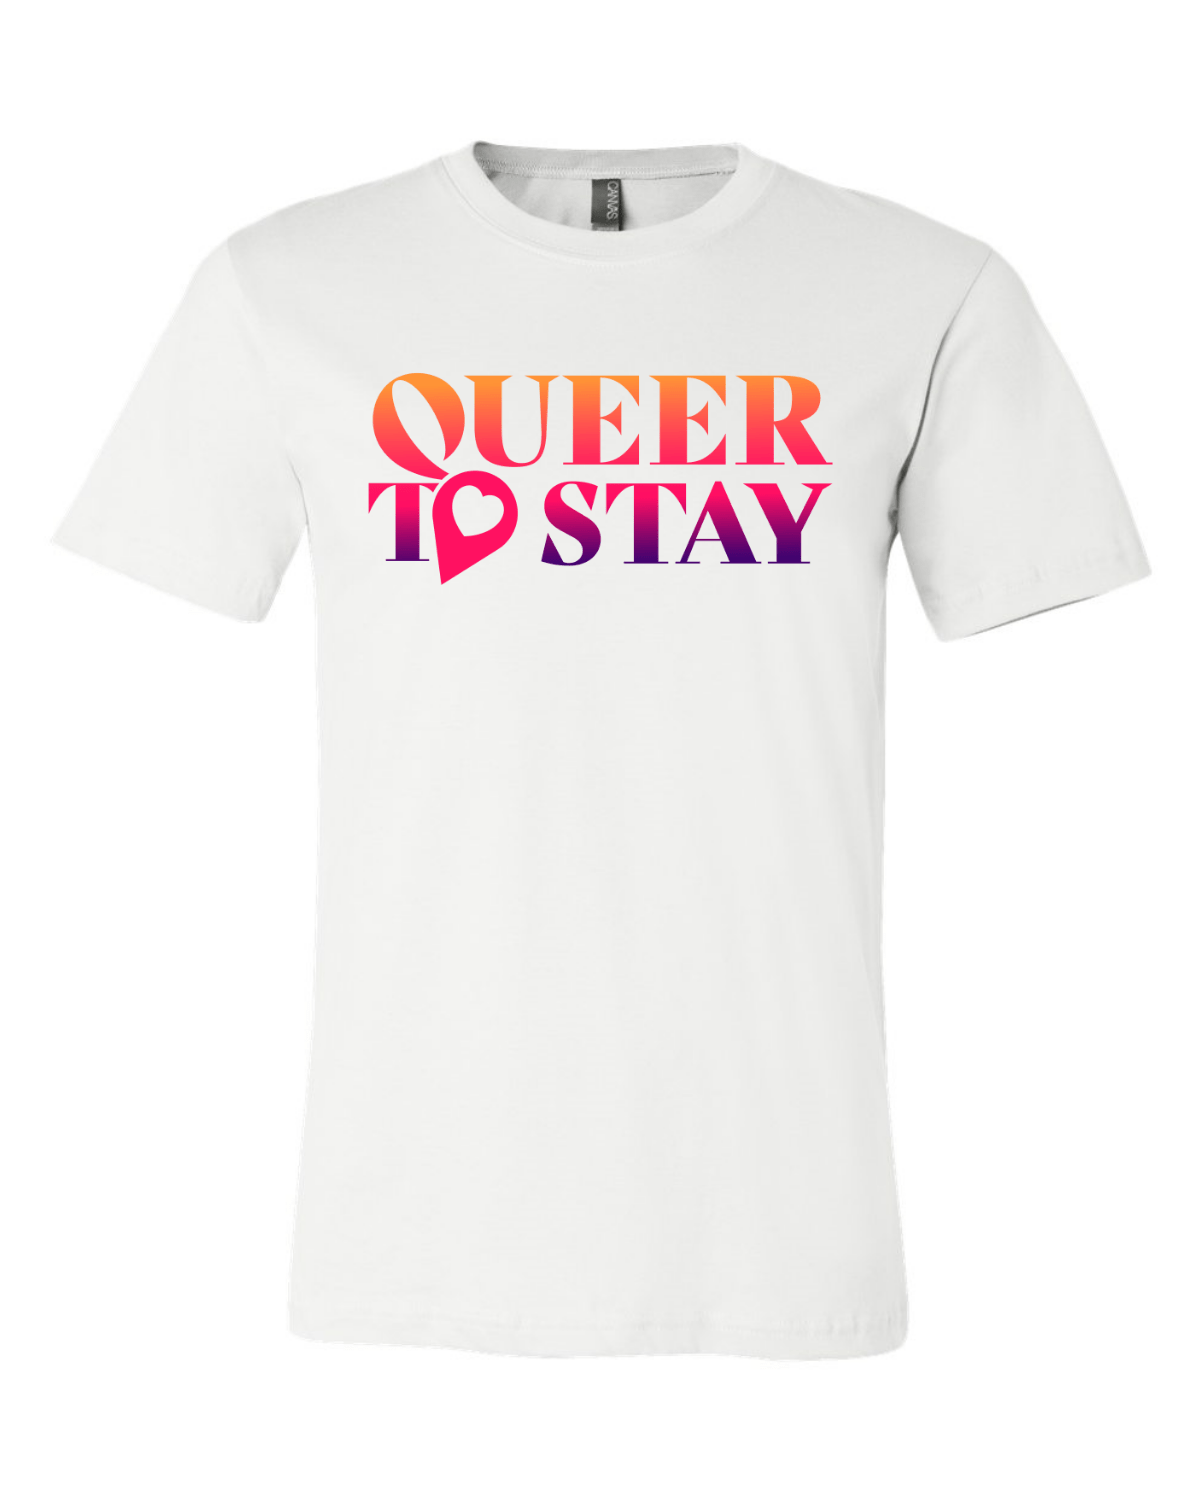 SHOWTIME Queer to Stay Adult Short Sleeve T - Shirt - Paramount Shop